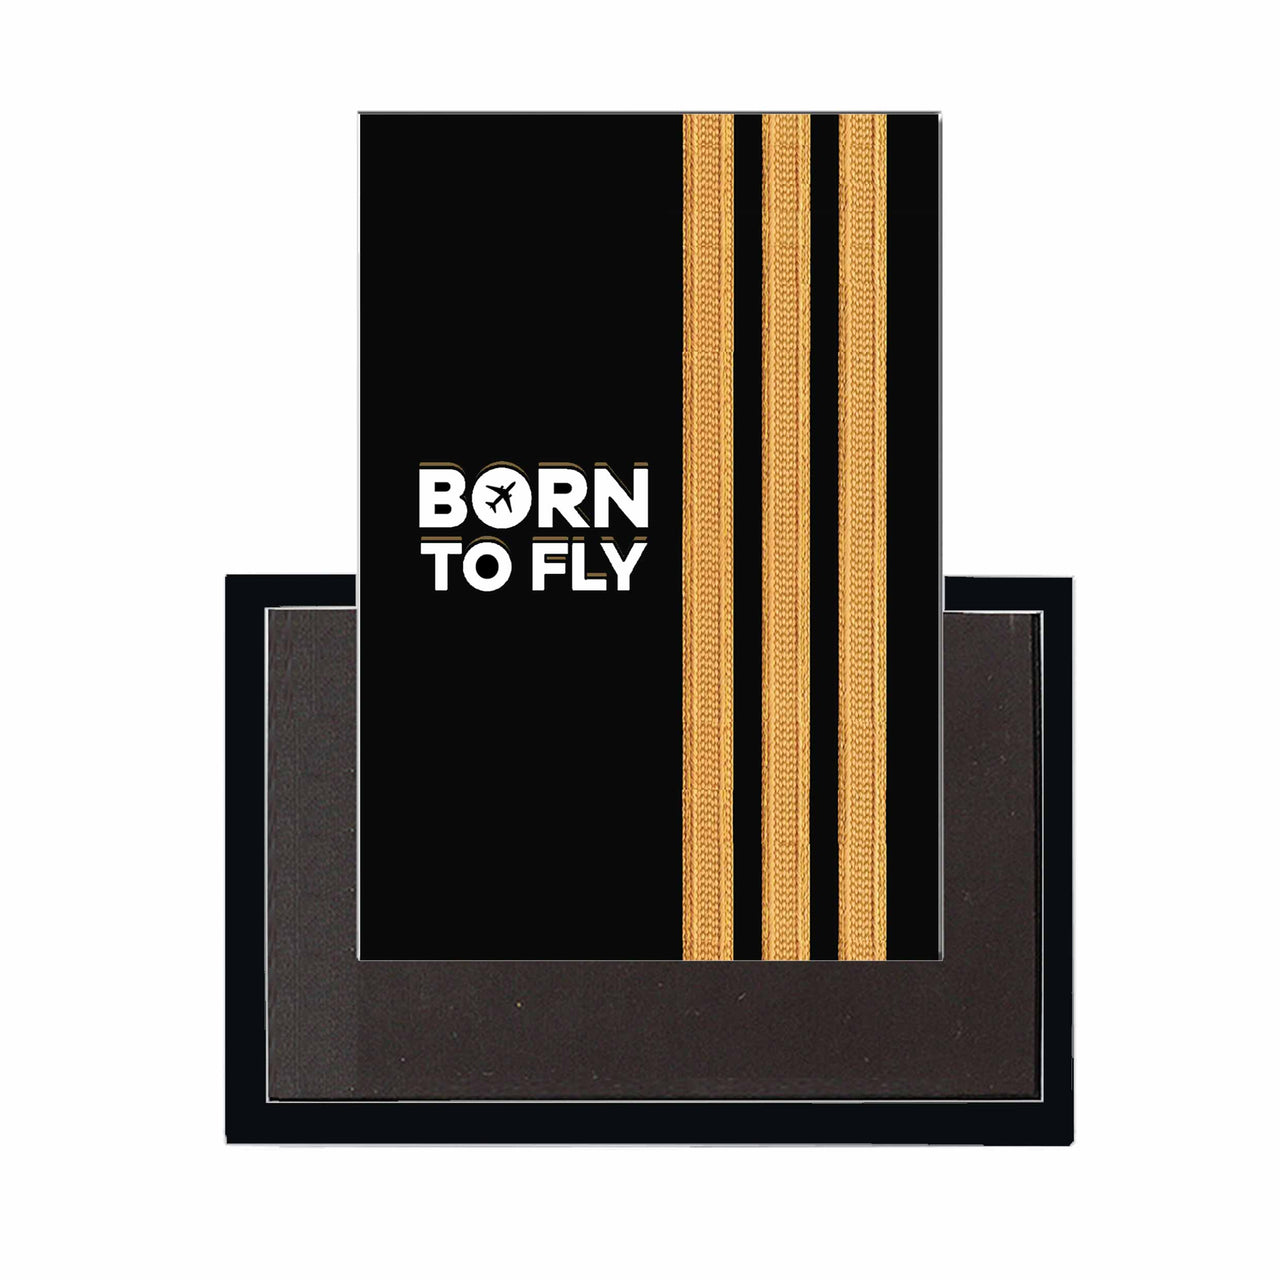 Born To Fly & Pilot Epaulettes (3 Lines) Designed Magnets